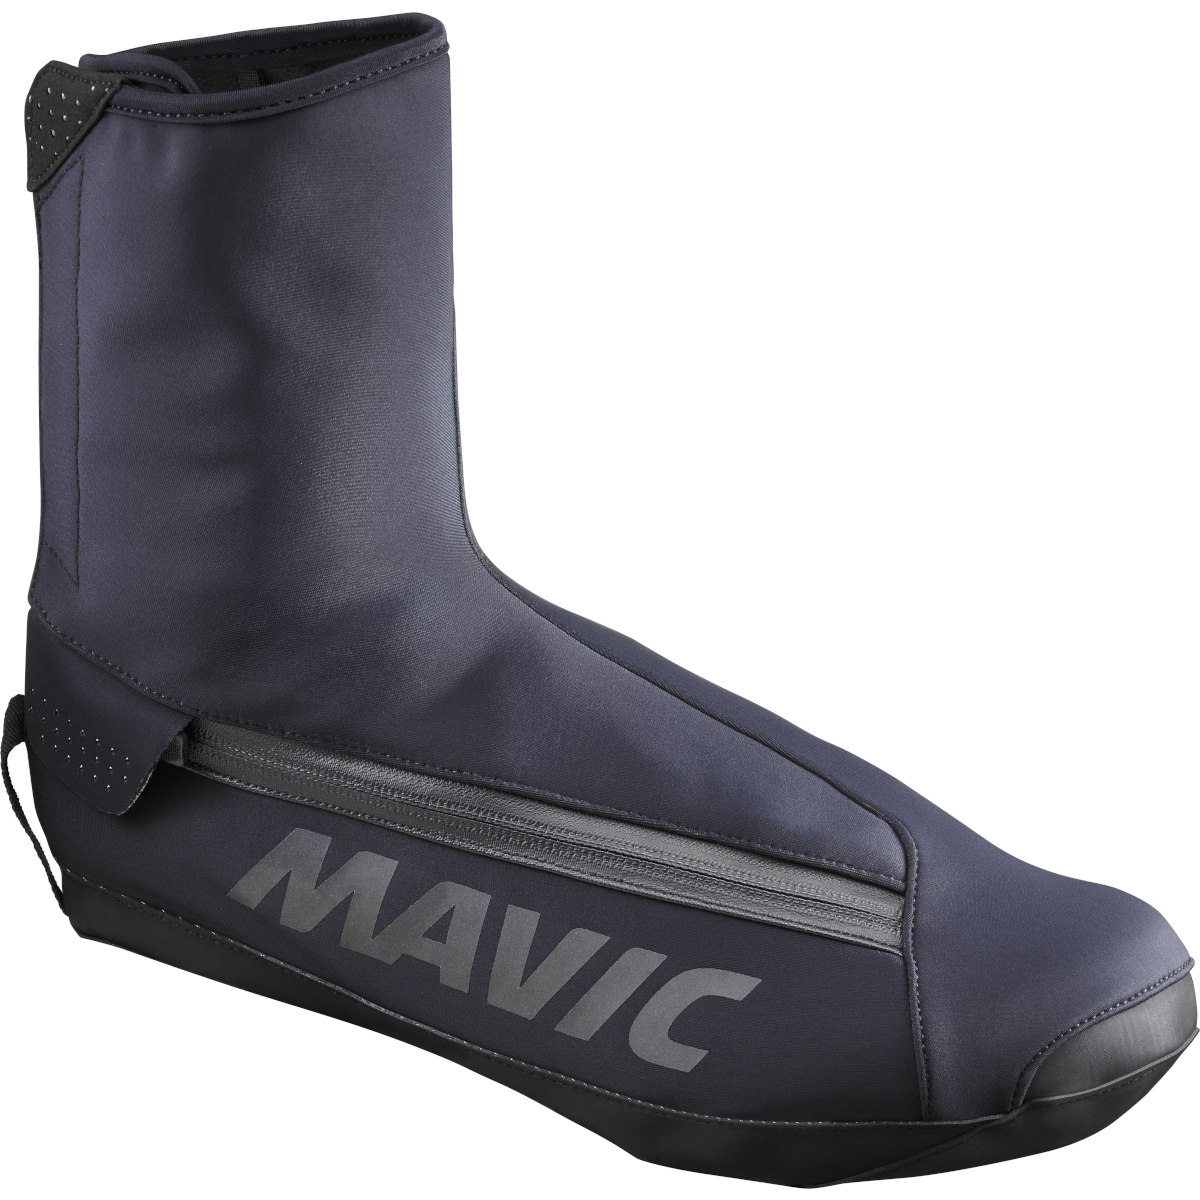 Picture of Mavic Essential Thermo Road Shoe Covers - black